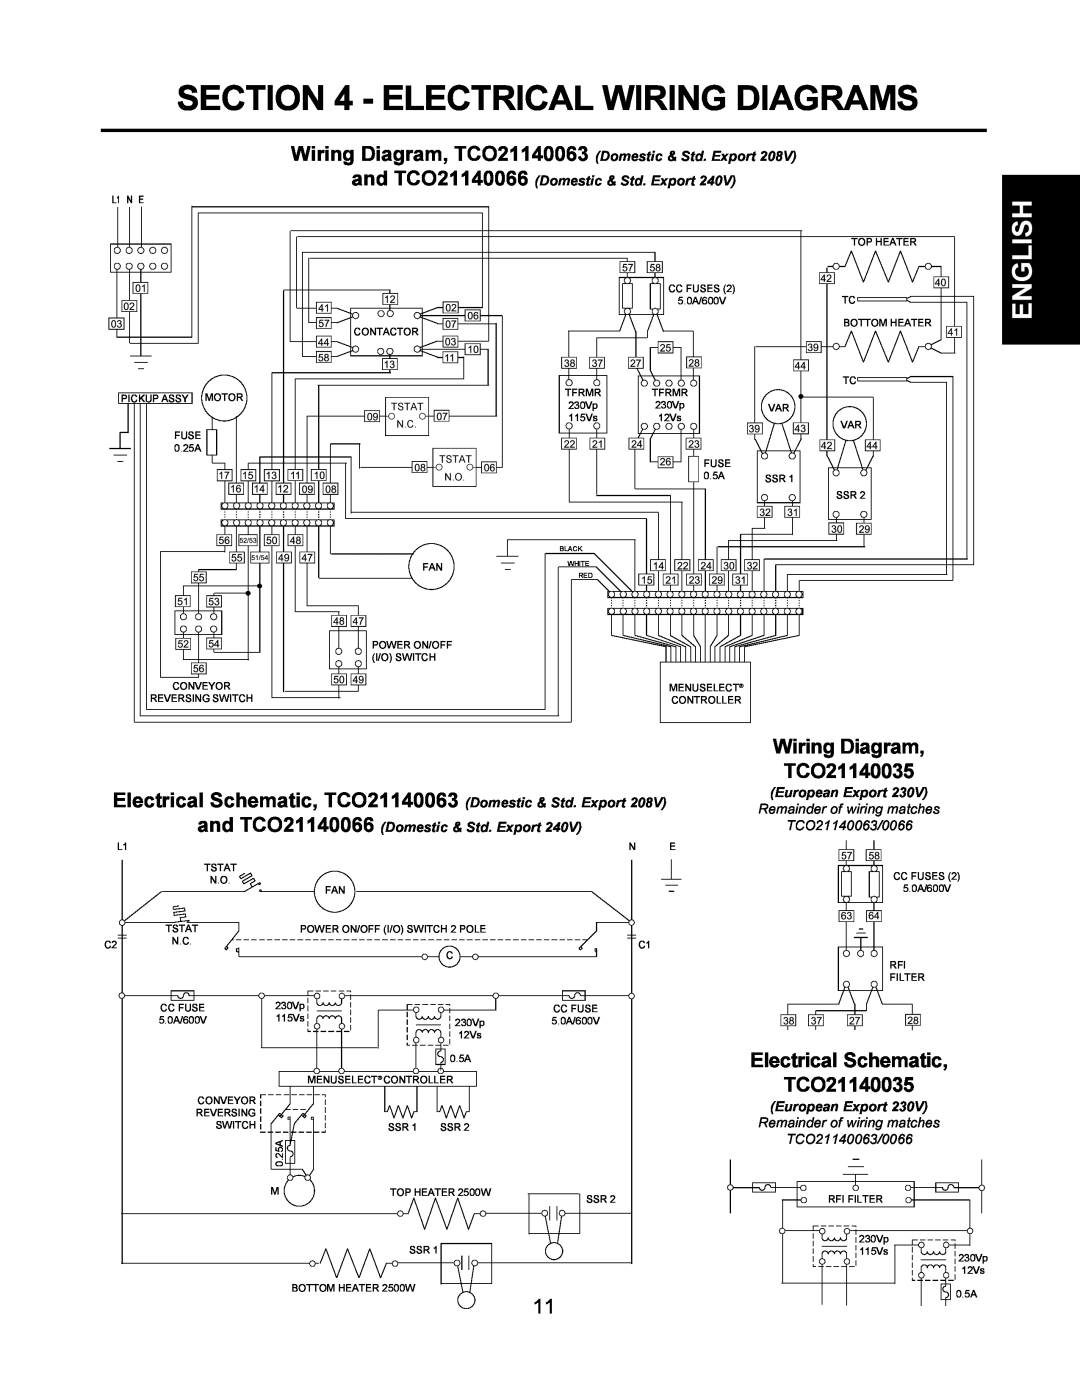 Middleby Cooking Systems Group TCO21140066 Electrical Wiring Diagrams, Electrical Schematic TCO21140035, English 